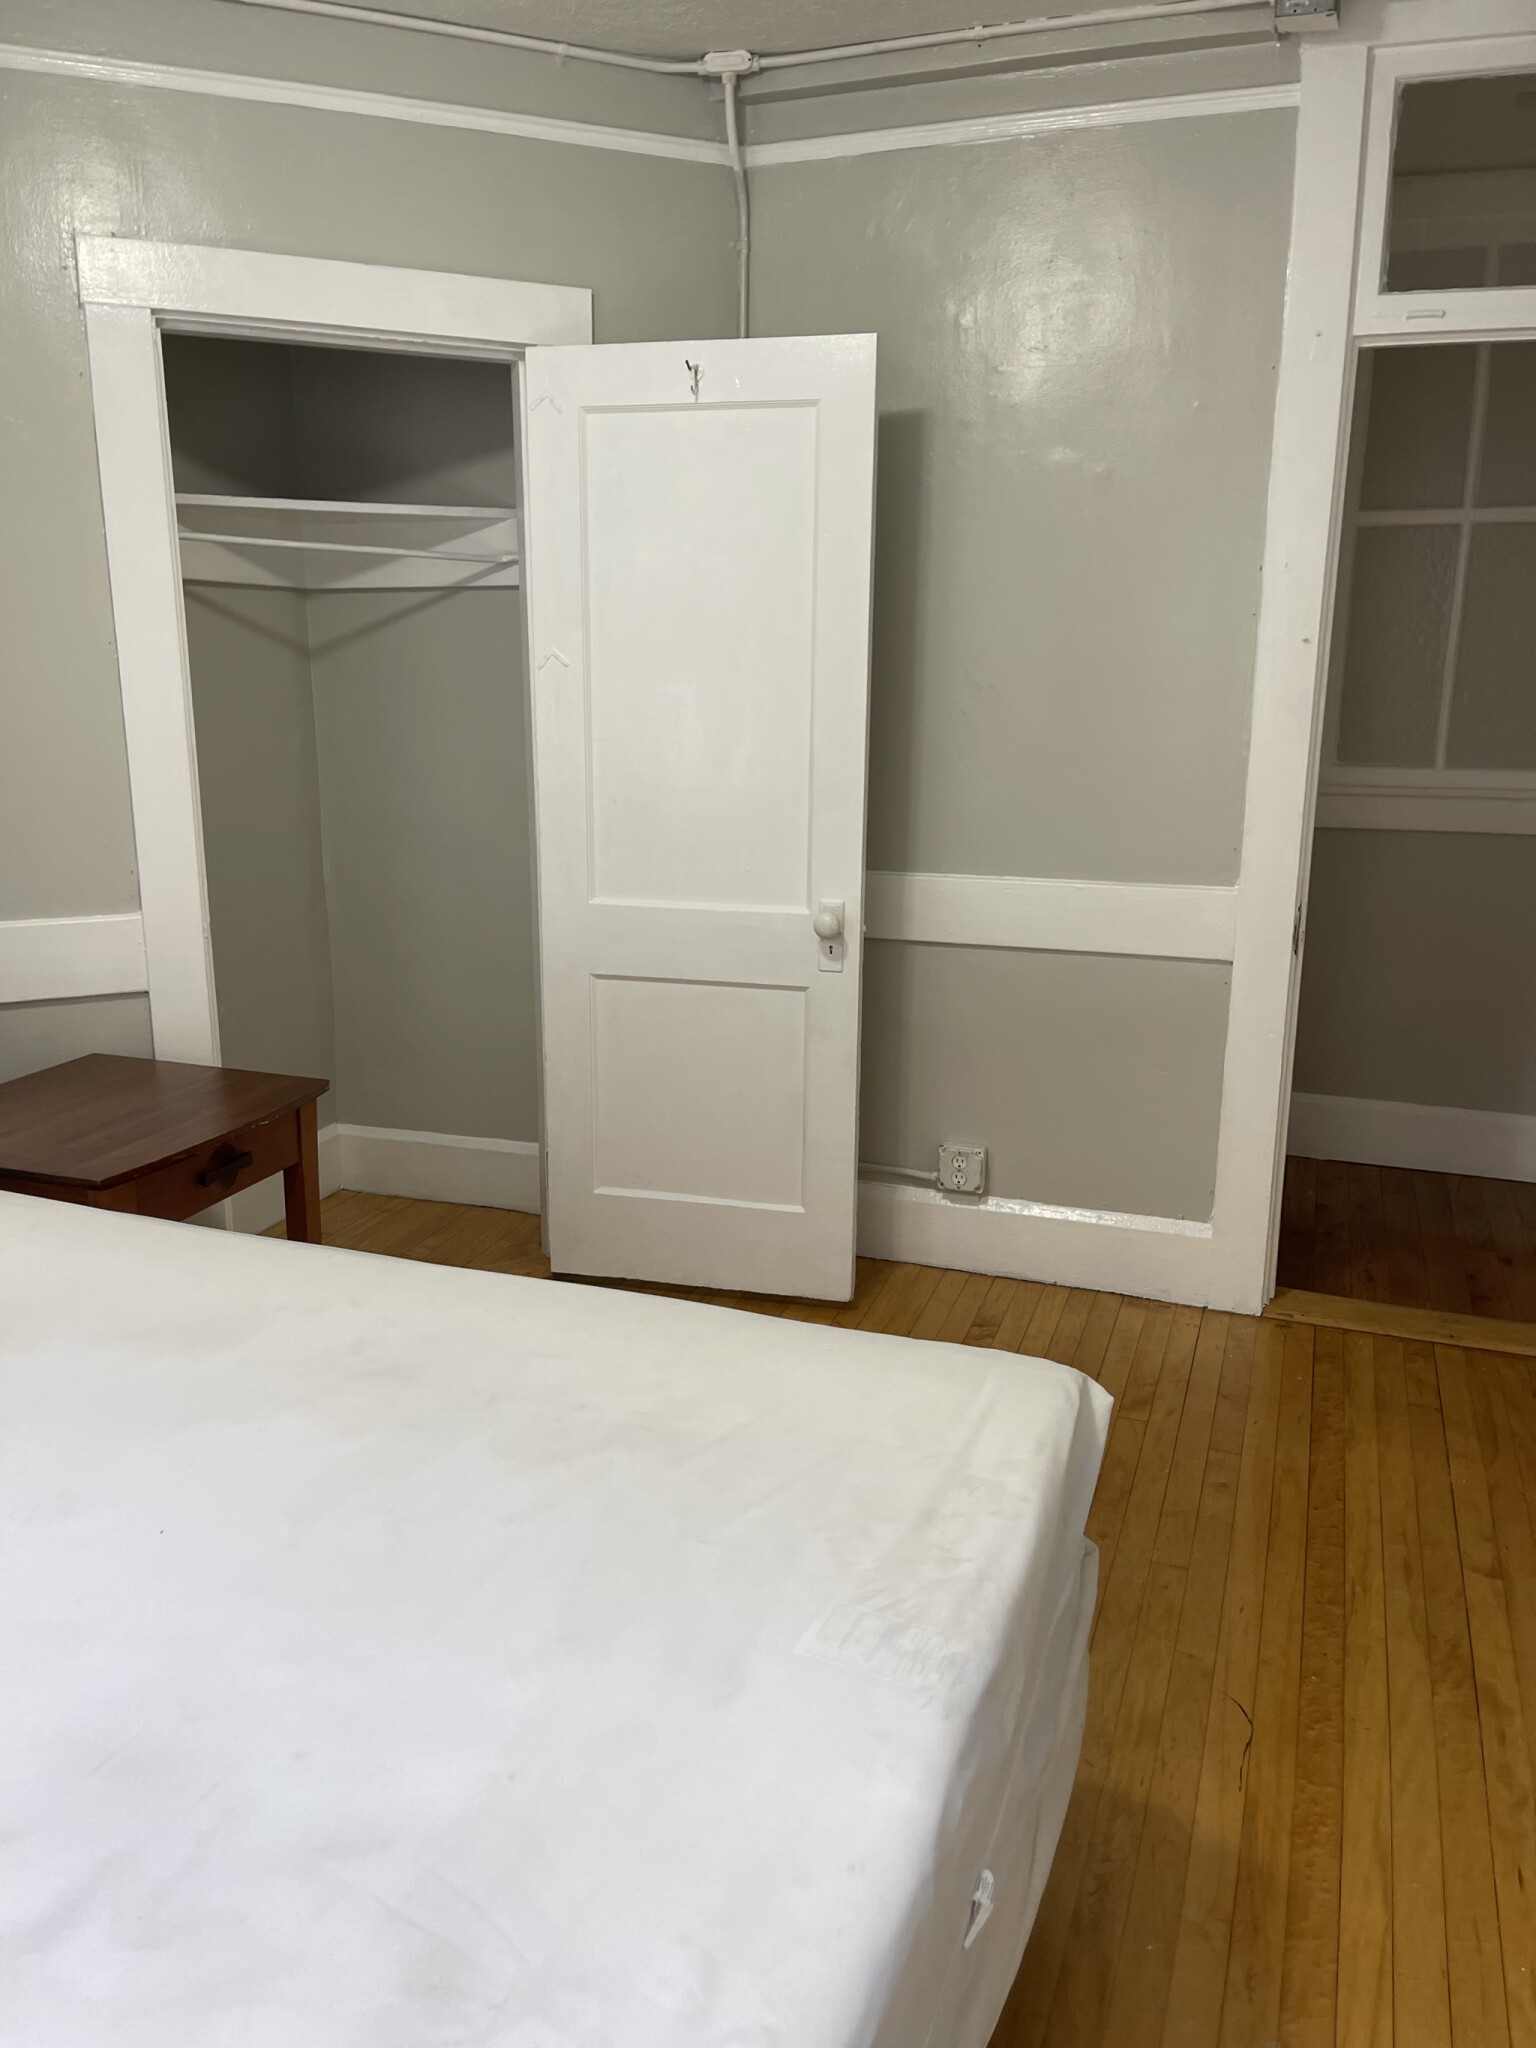 2 Beds, 1 Bath apartment in Boston for $3,400